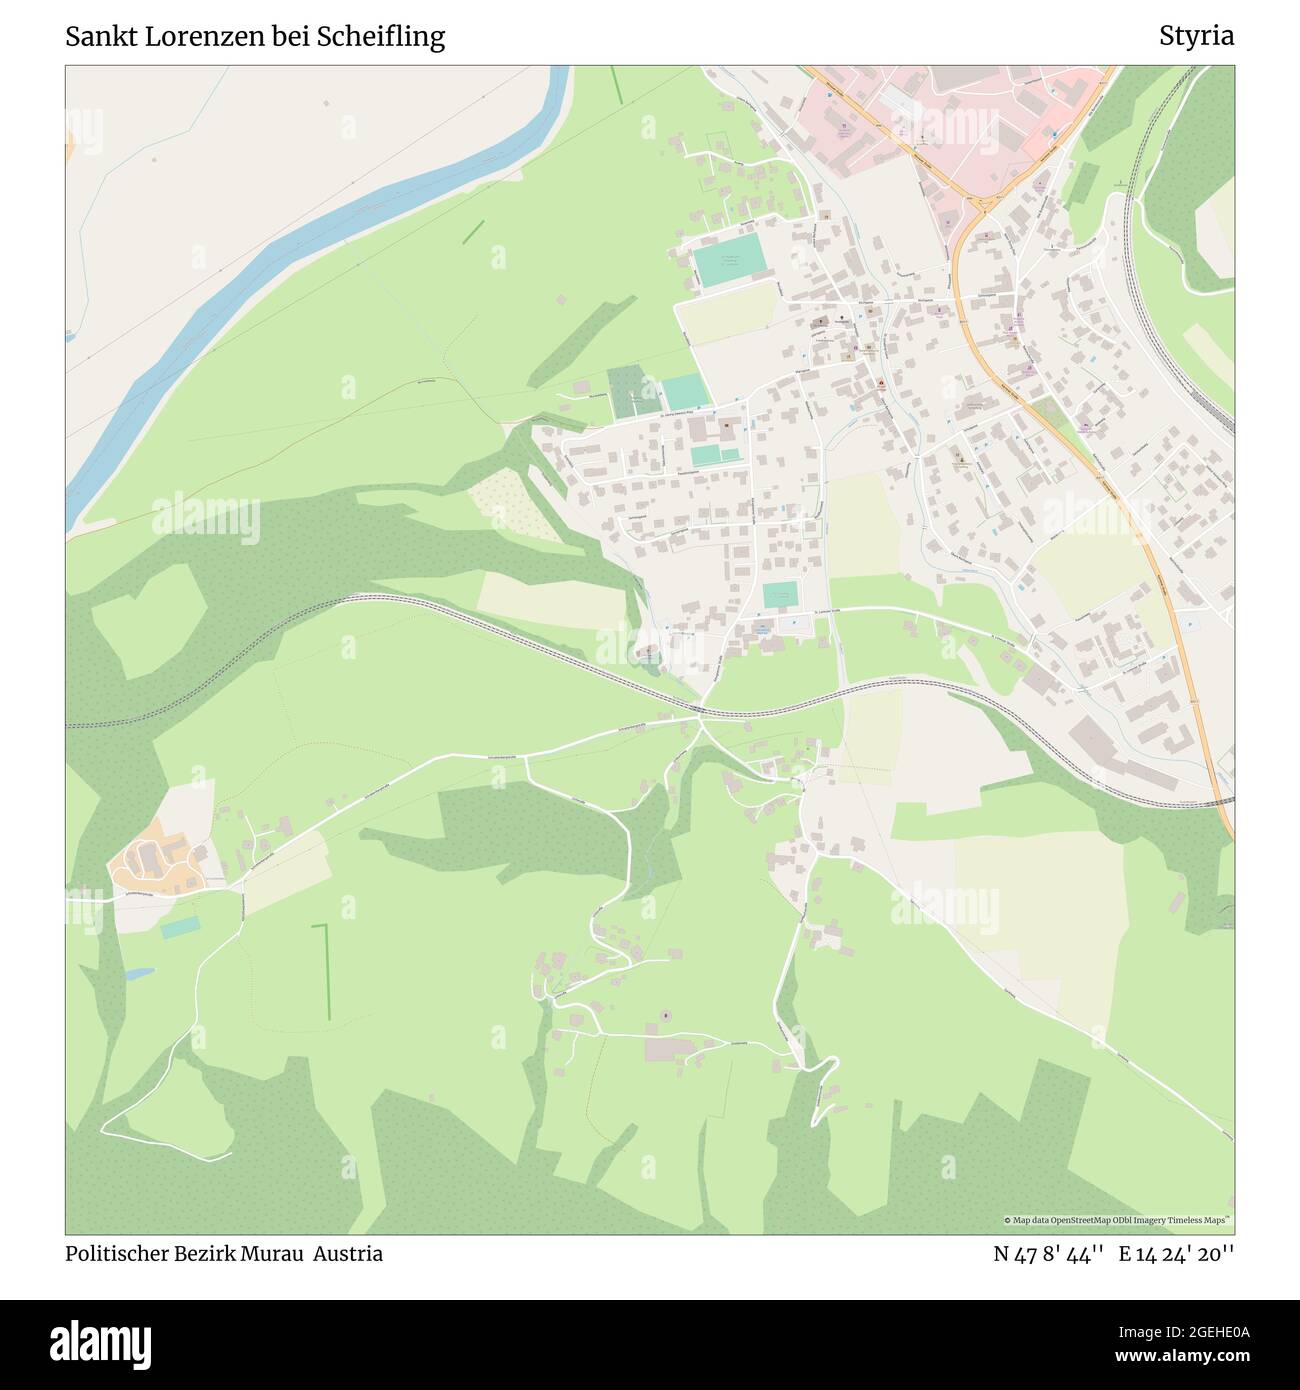 Sankt Lorenzen bei Scheifling, Politischer Bezirk Murau, Austria, Styria, N 47 8' 44'', E 14 24' 20'', map, Timeless Map published in 2021. Travelers, explorers and adventurers like Florence Nightingale, David Livingstone, Ernest Shackleton, Lewis and Clark and Sherlock Holmes relied on maps to plan travels to the world's most remote corners, Timeless Maps is mapping most locations on the globe, showing the achievement of great dreams Stock Photo